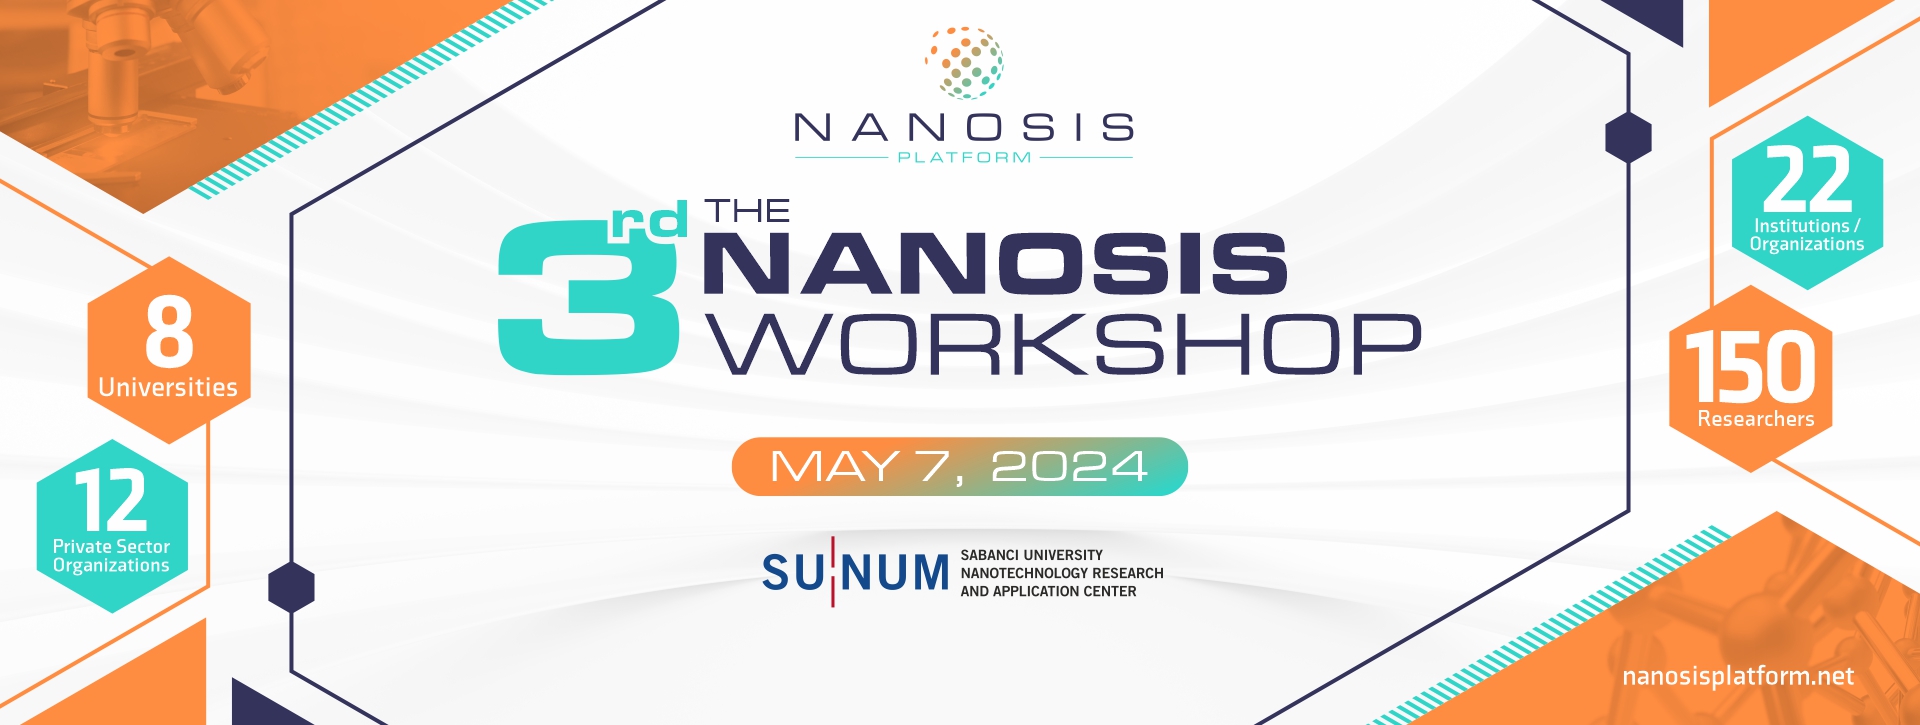 The 3rd NANOSIS Workshop will be held on May 7
